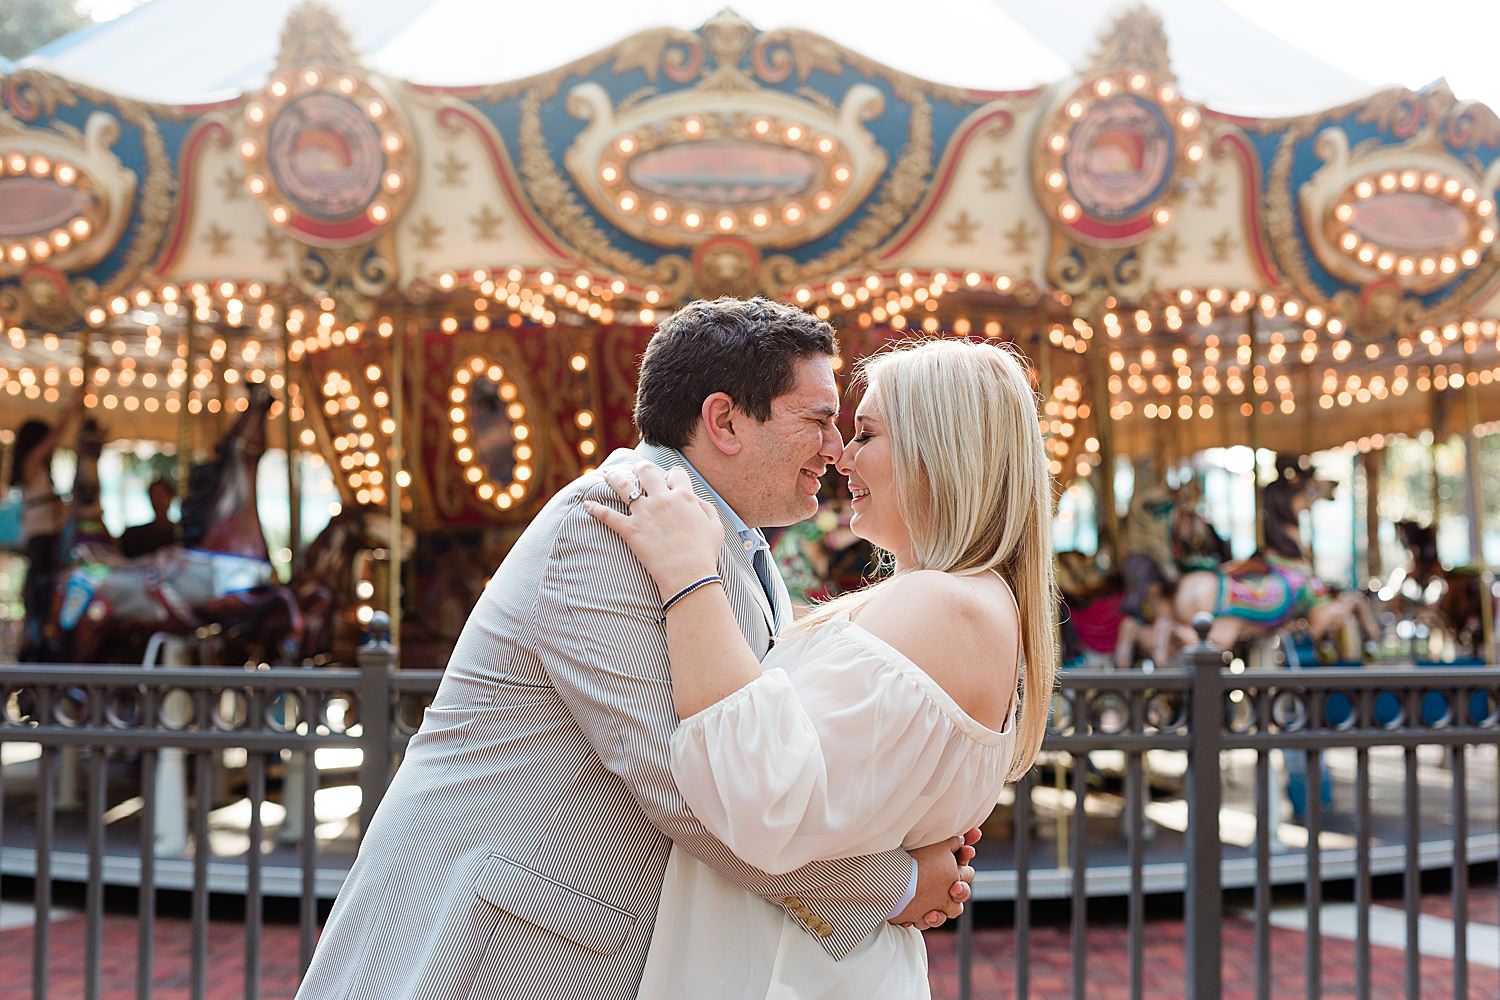 Couple shares eskimo kisses and smiles big in front of a carousel